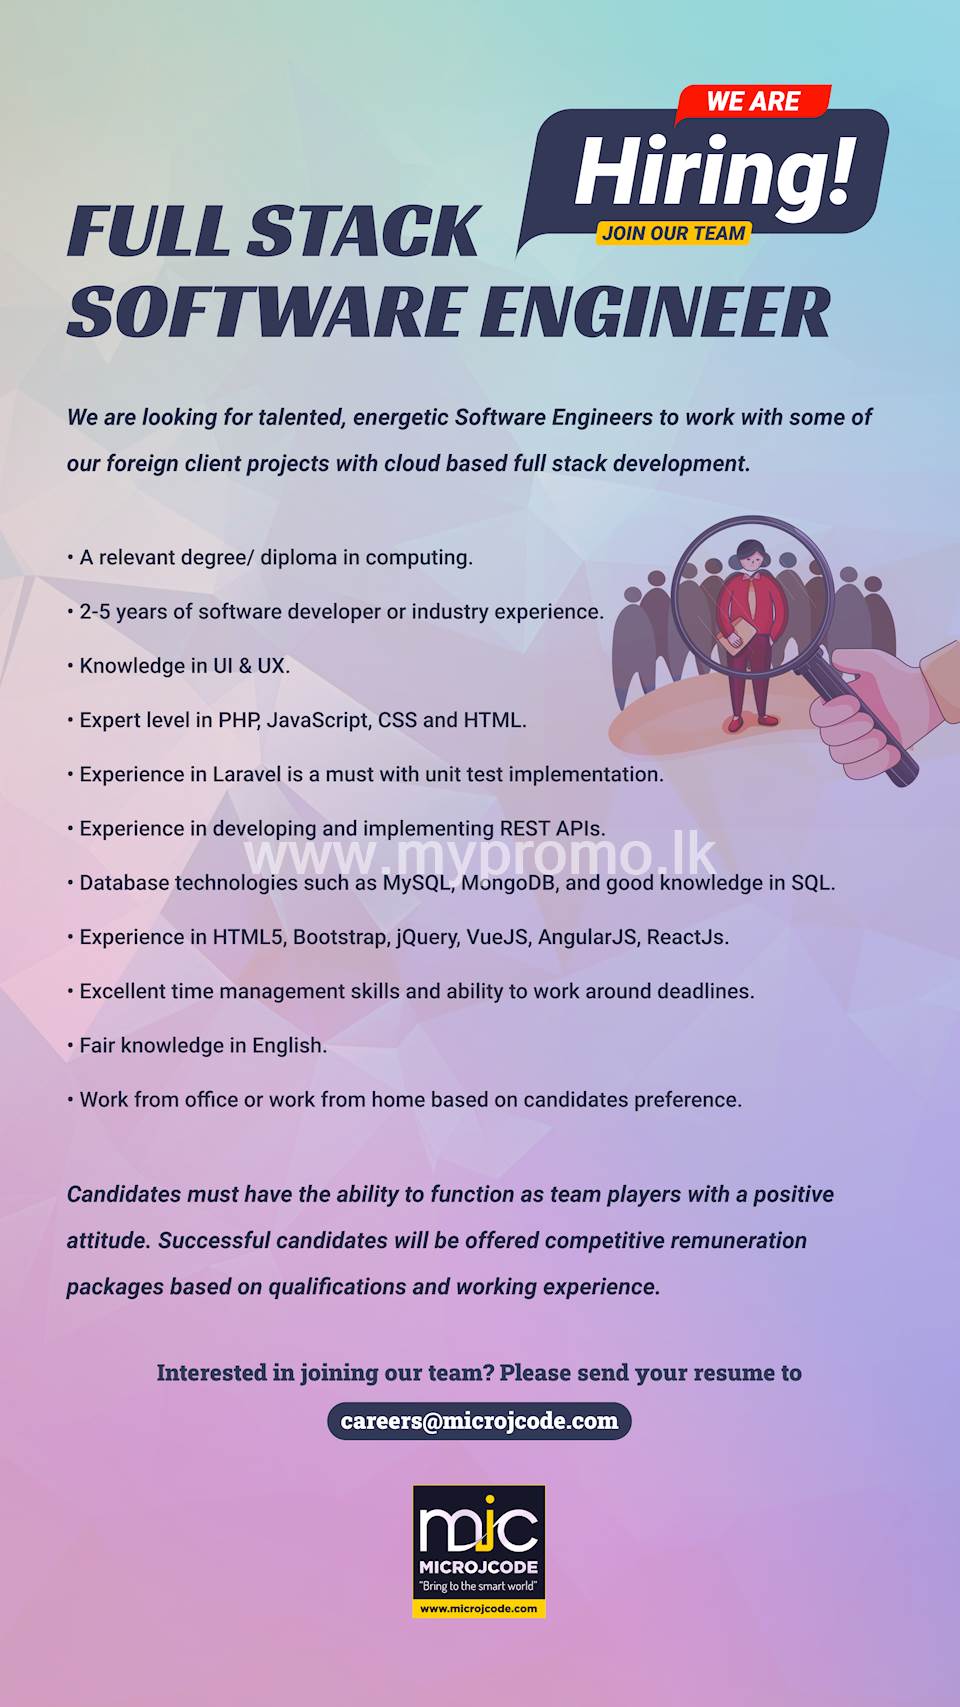 Full stack software engineer